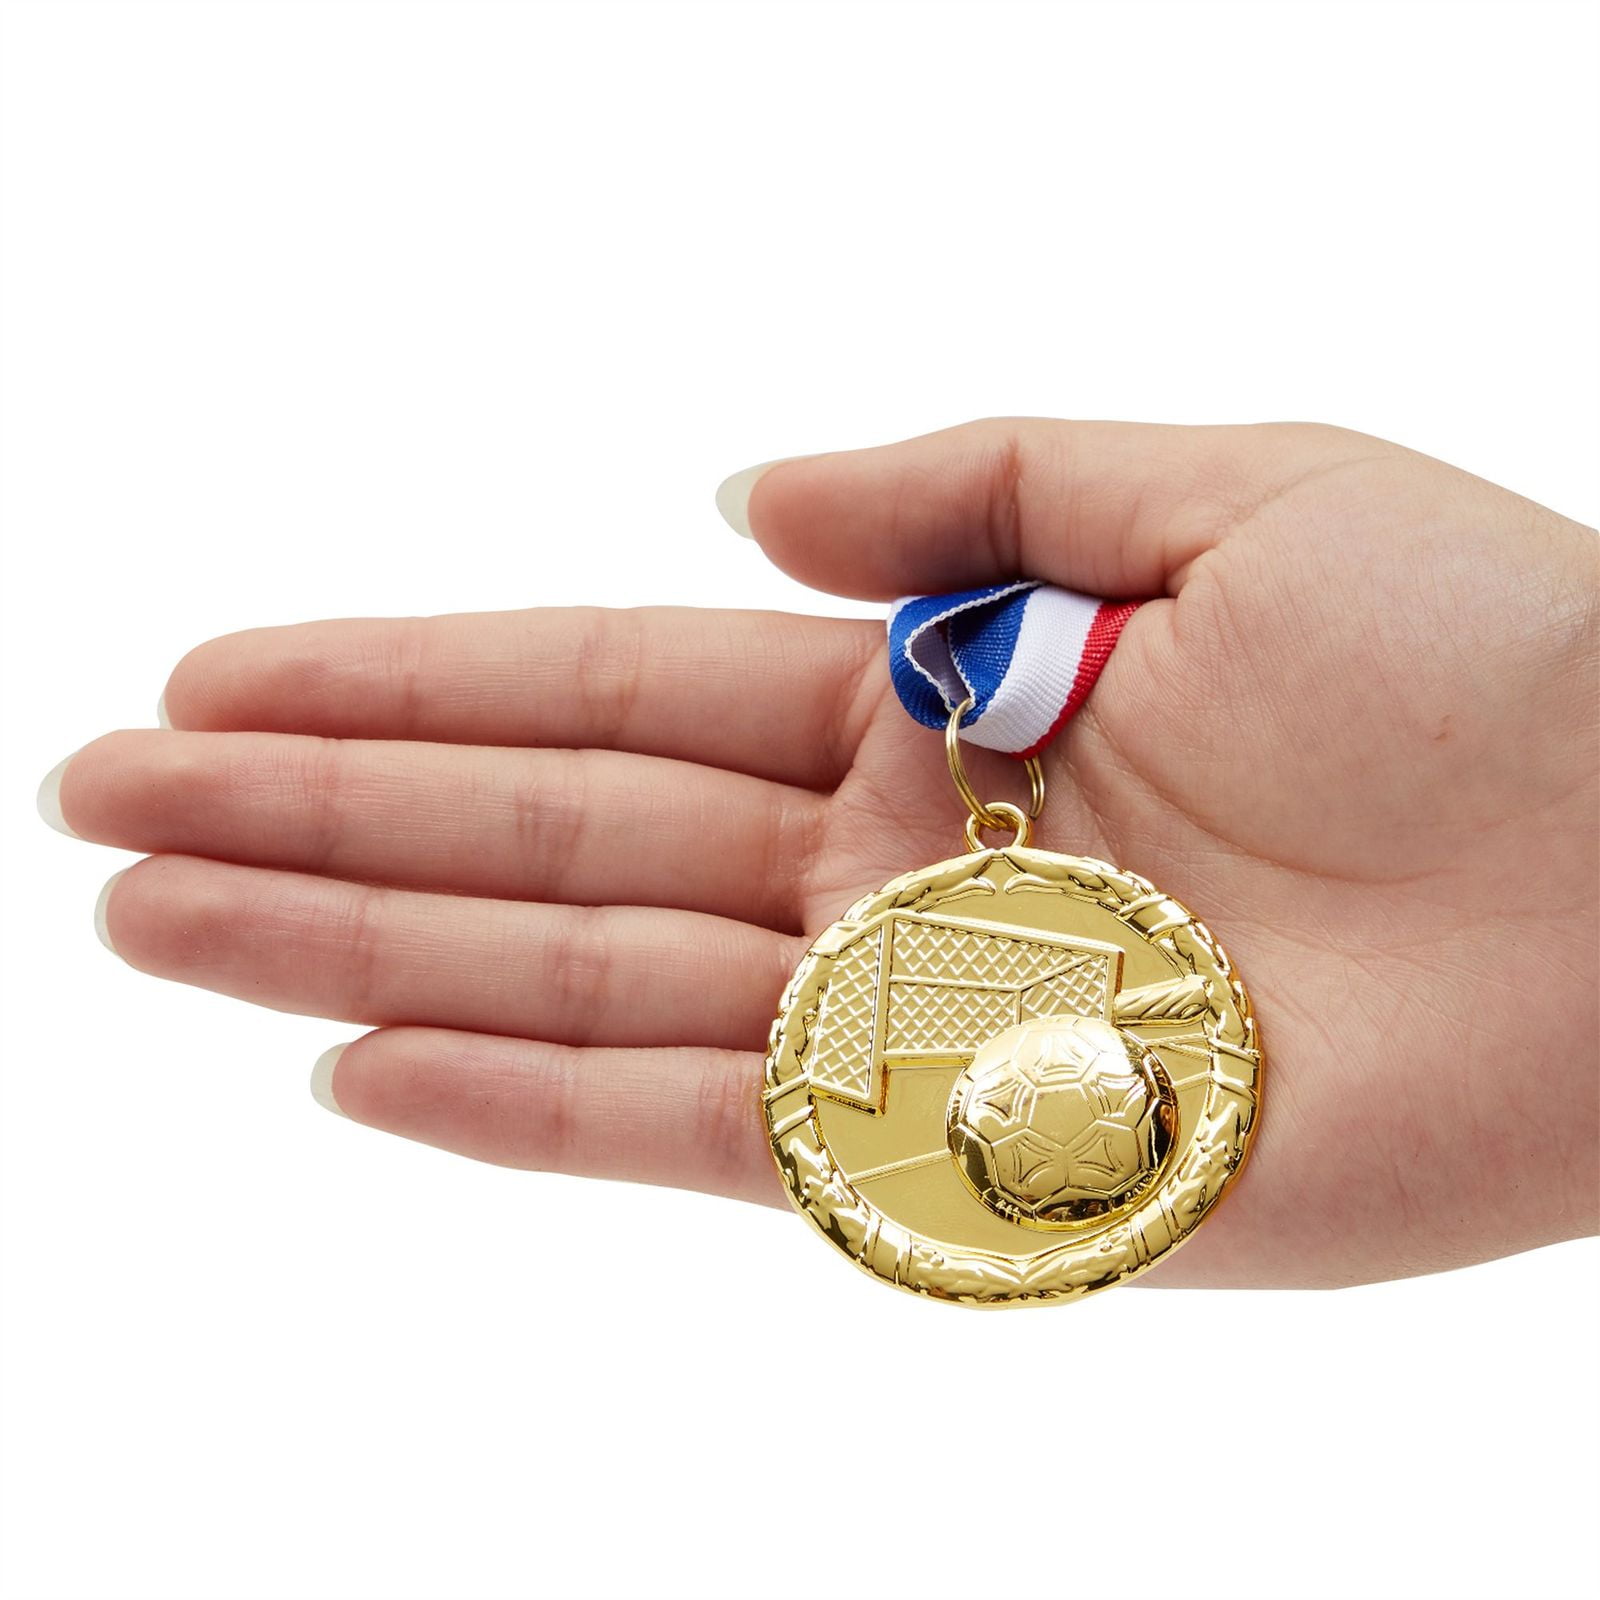 2 Inches 12 Pack Medal for Awards Soccer Games Party Favors Prizes for Children Adults Olympic Style Gold Metal Medals with Ribbons for Soccer Team Gifts Soccer Medals for Kids 